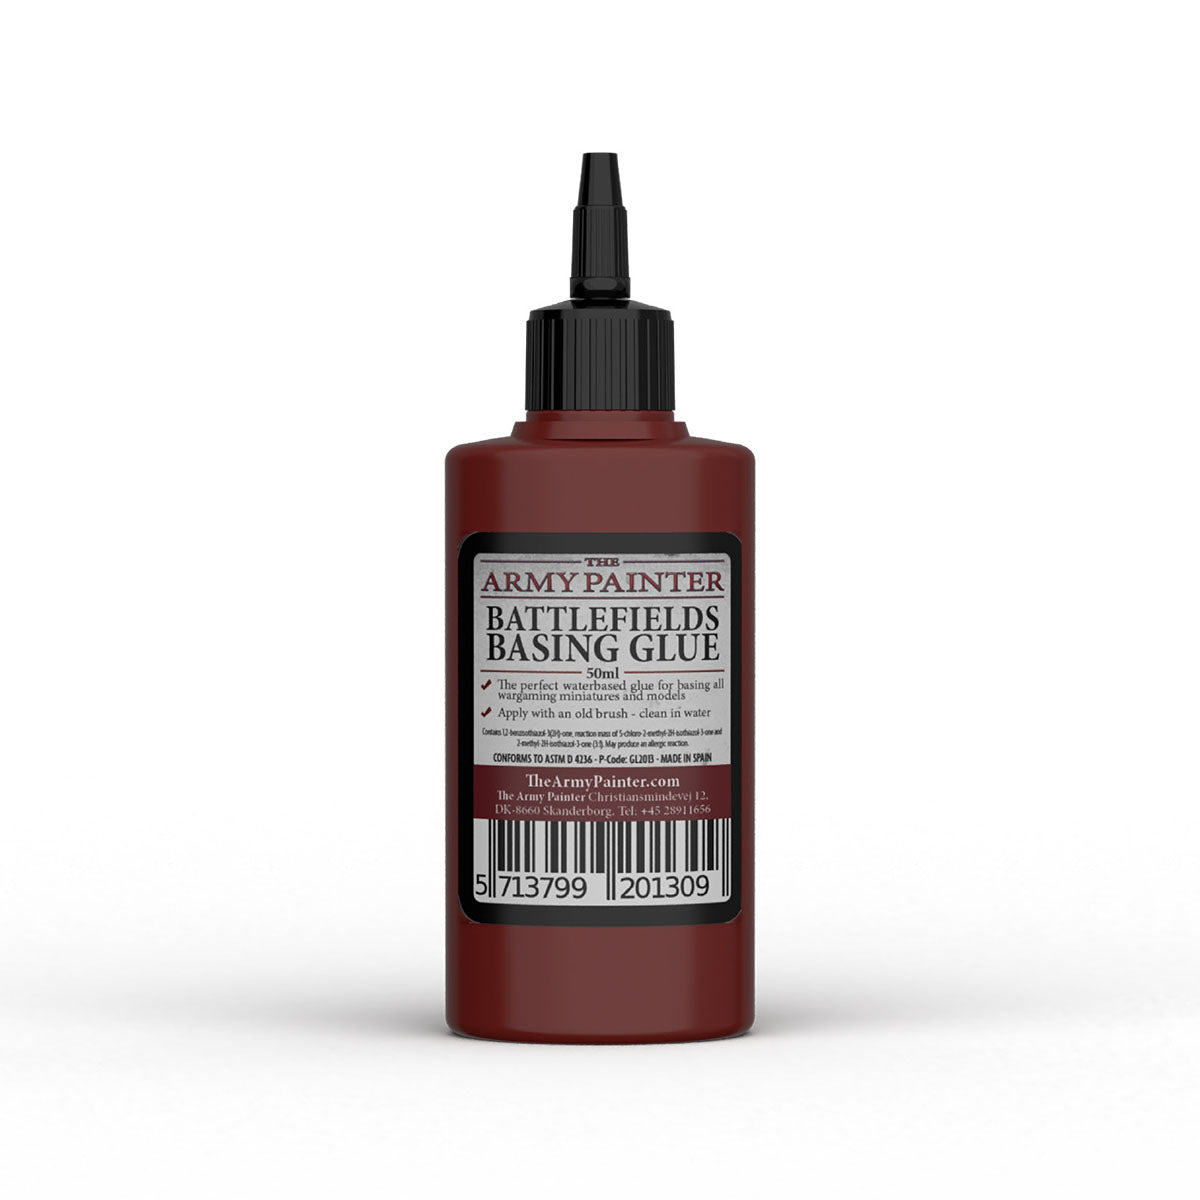 Best glue for miniatures and models? 